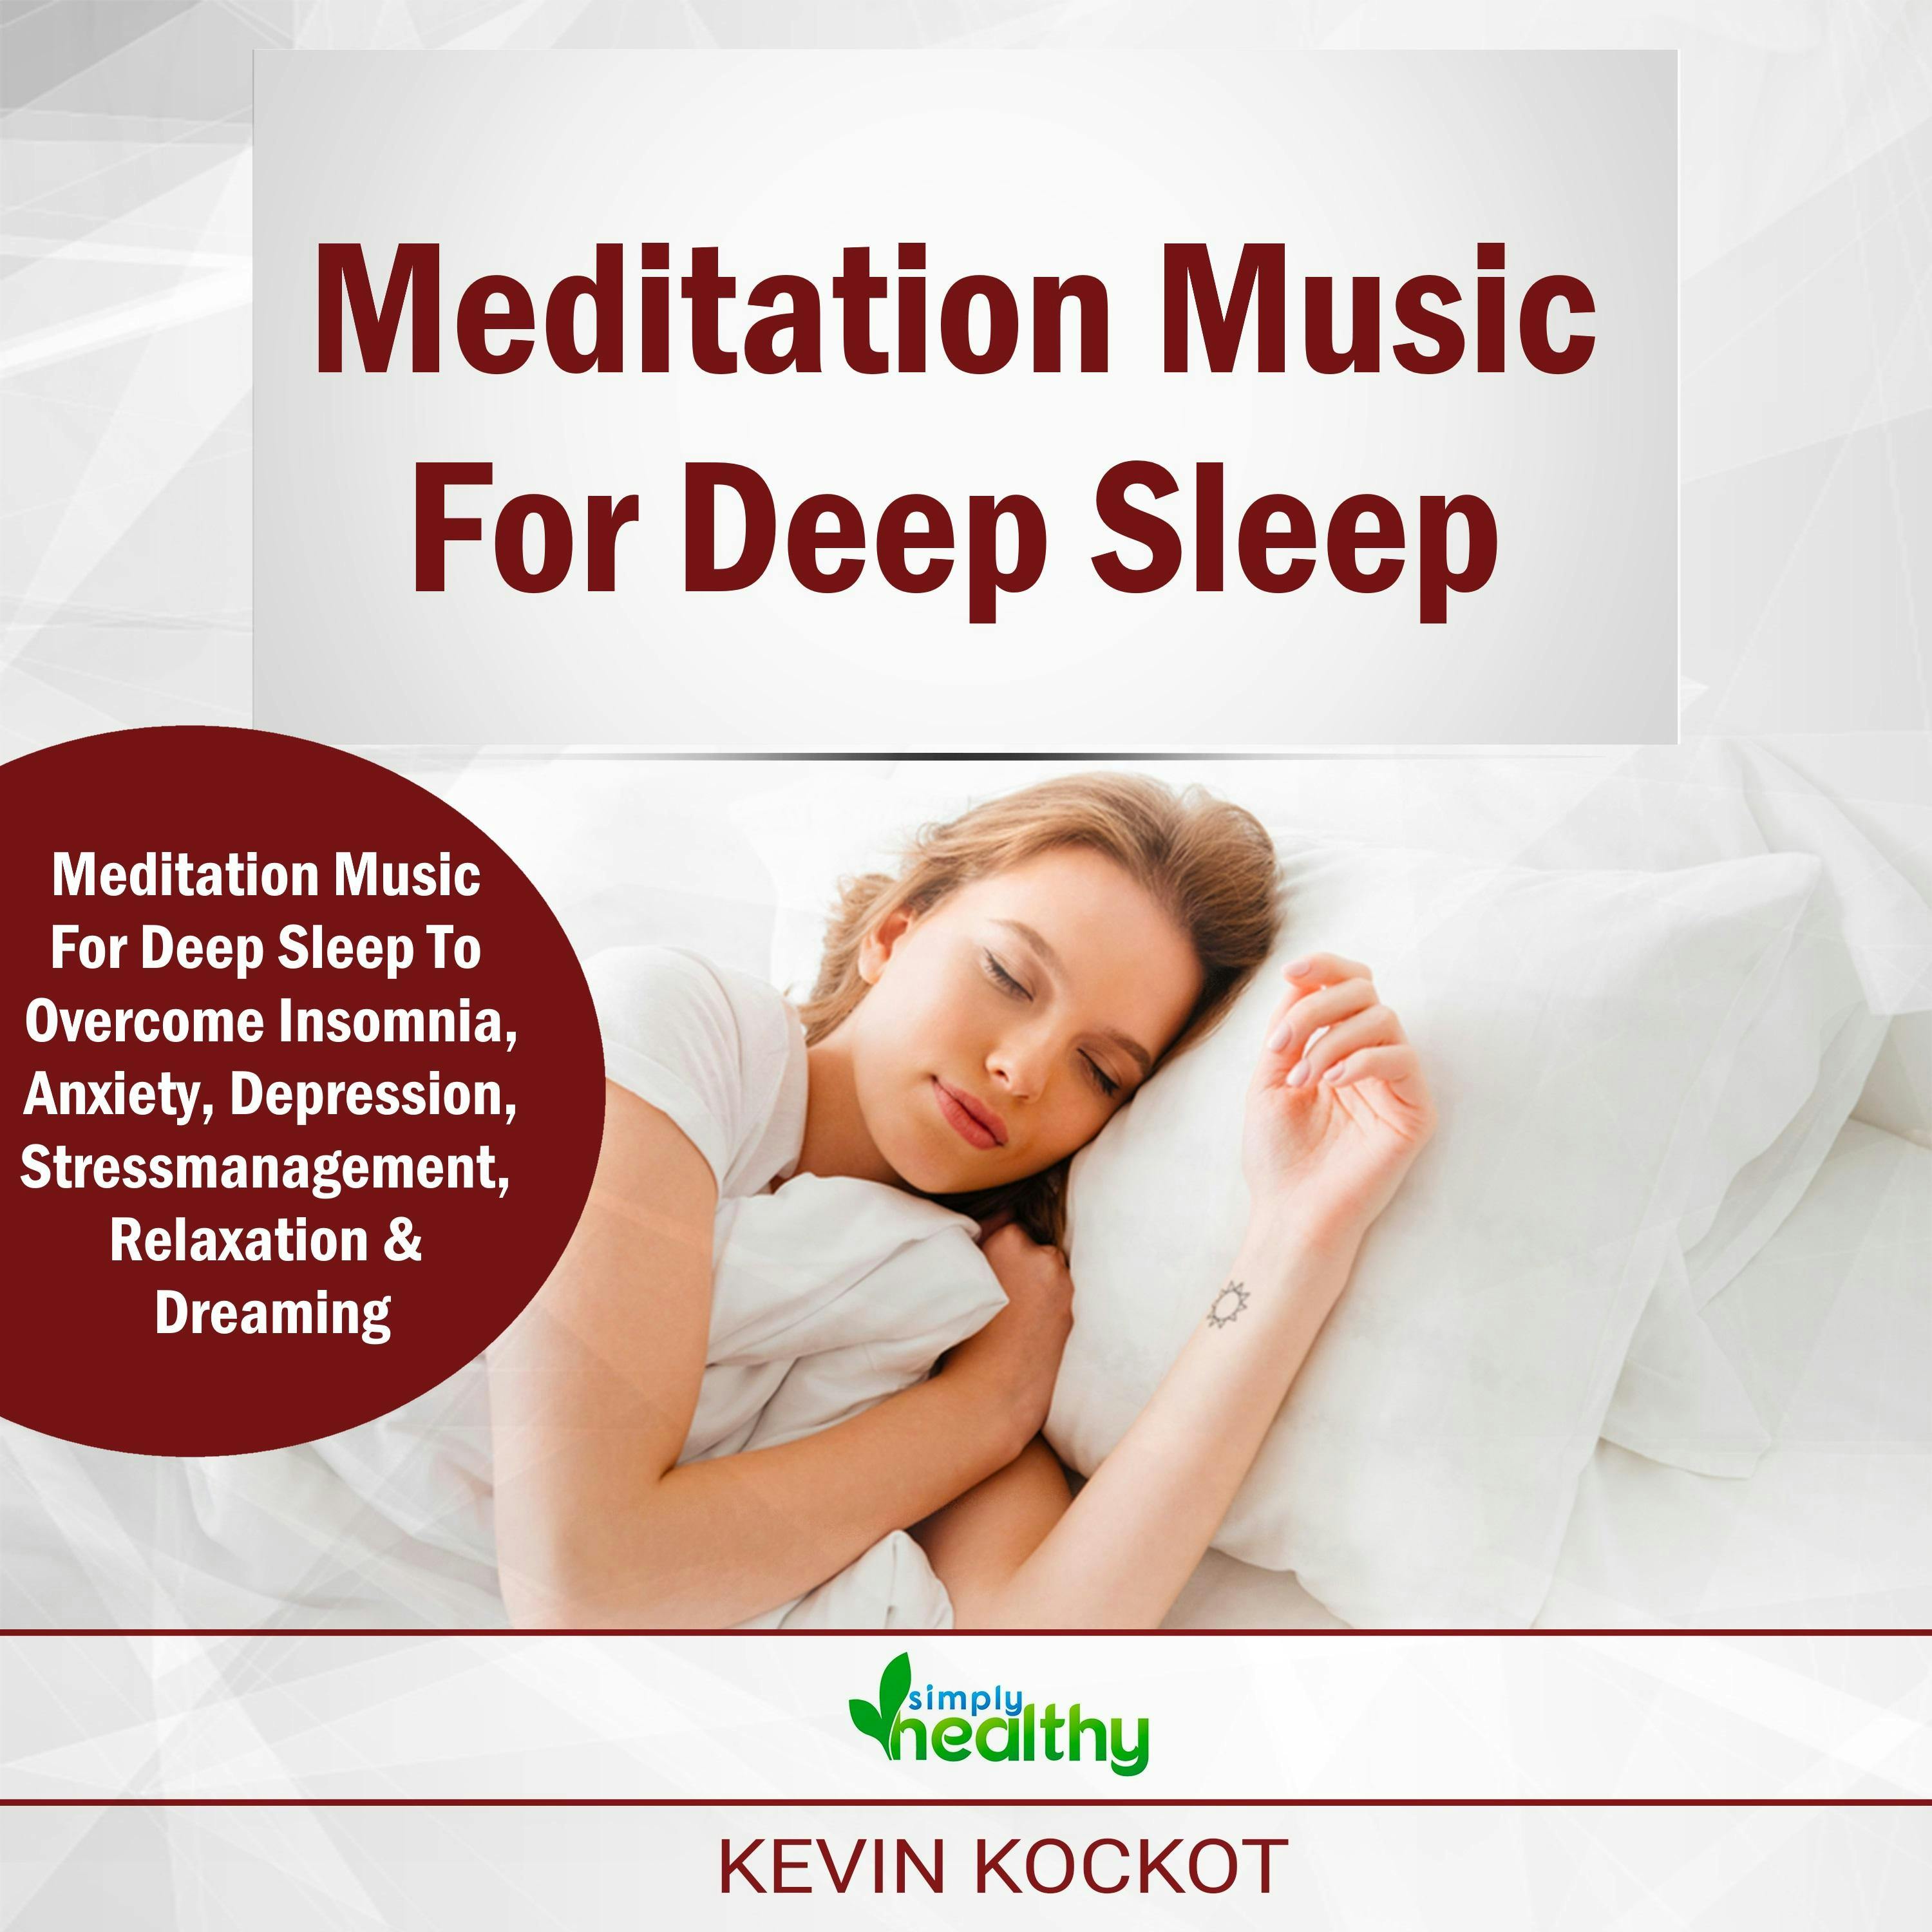 Meditation Music For Deep Sleep: Meditation Music & Guided Meditations To Overcome Insomnia, Anxiety, Depression, Stress Management, Relaxation and Enjoy Deep Sleep - undefined